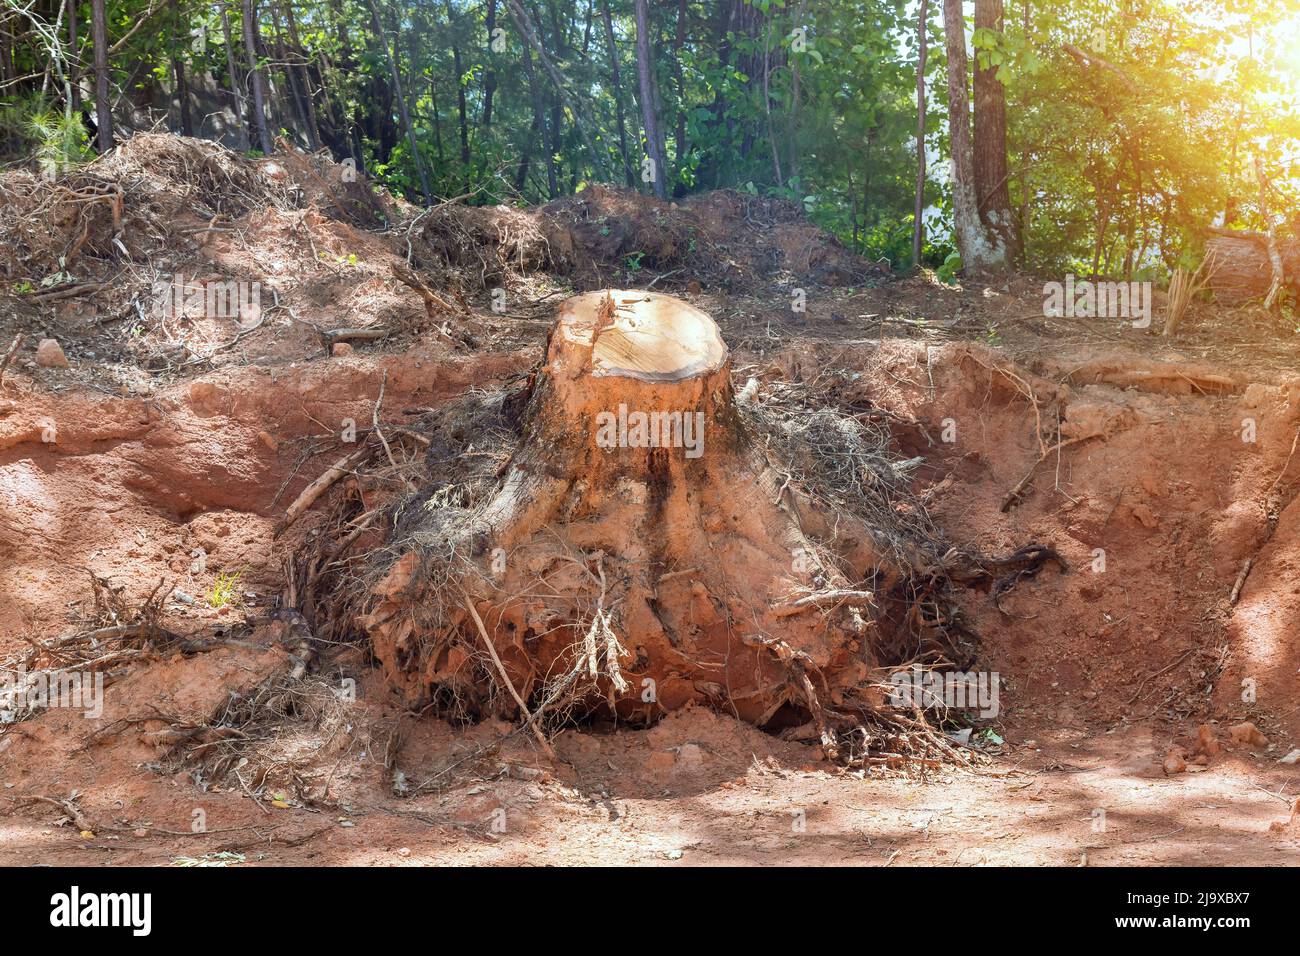 Preparing land for housing new complex property with tree stump removal the digging out of trunk roots Stock Photo